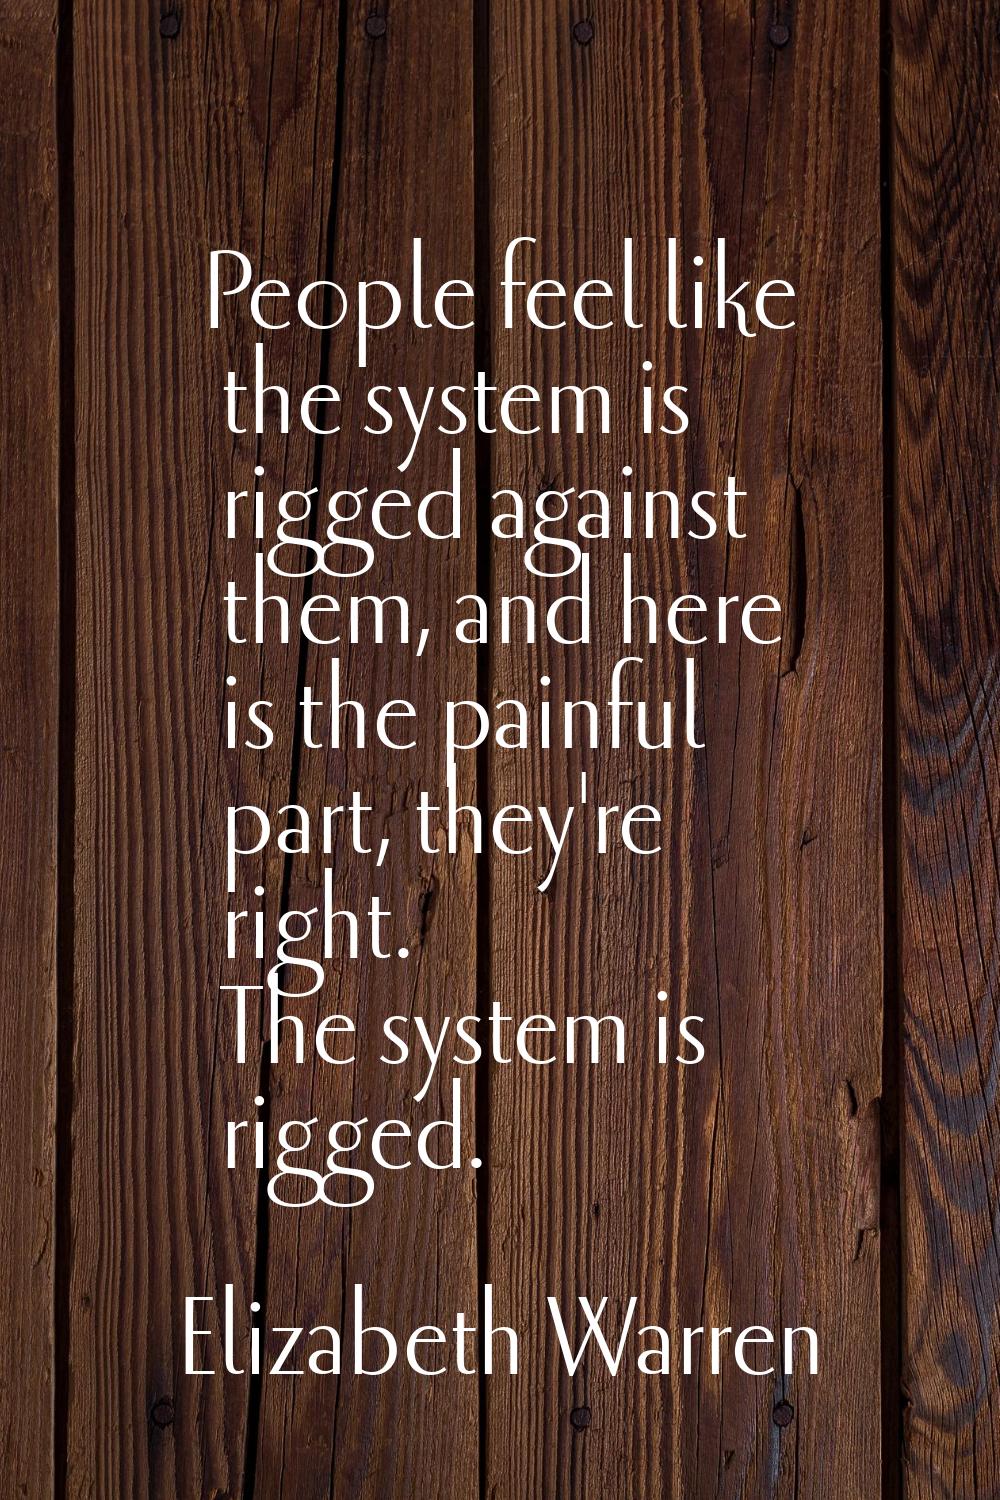 People feel like the system is rigged against them, and here is the painful part, they're right. Th